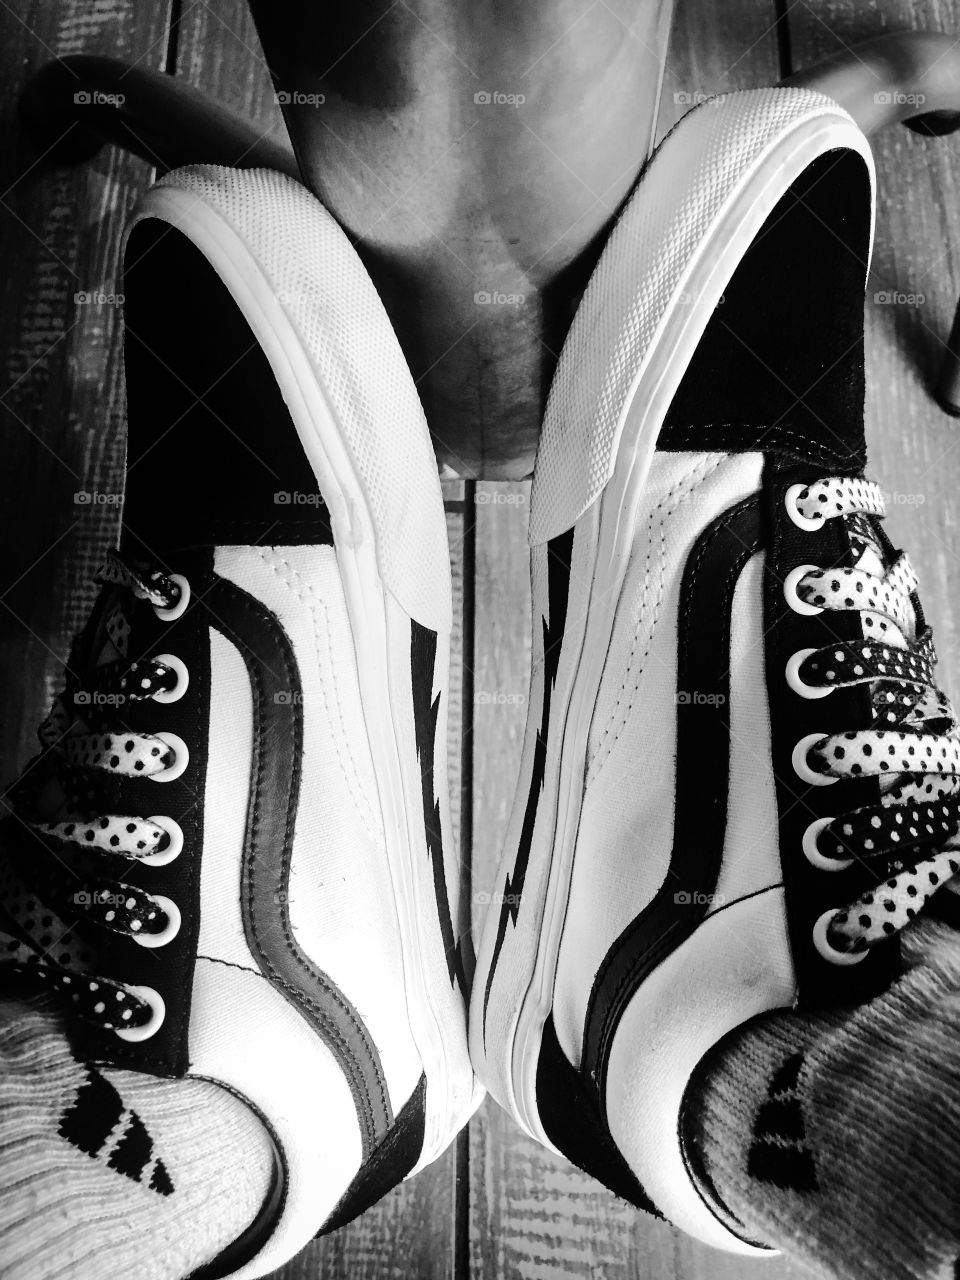 My customized old school vans shoes. Black and white only with lightning bolt foxing, double sided polka dot laces, and black suede vamp and heel counter.